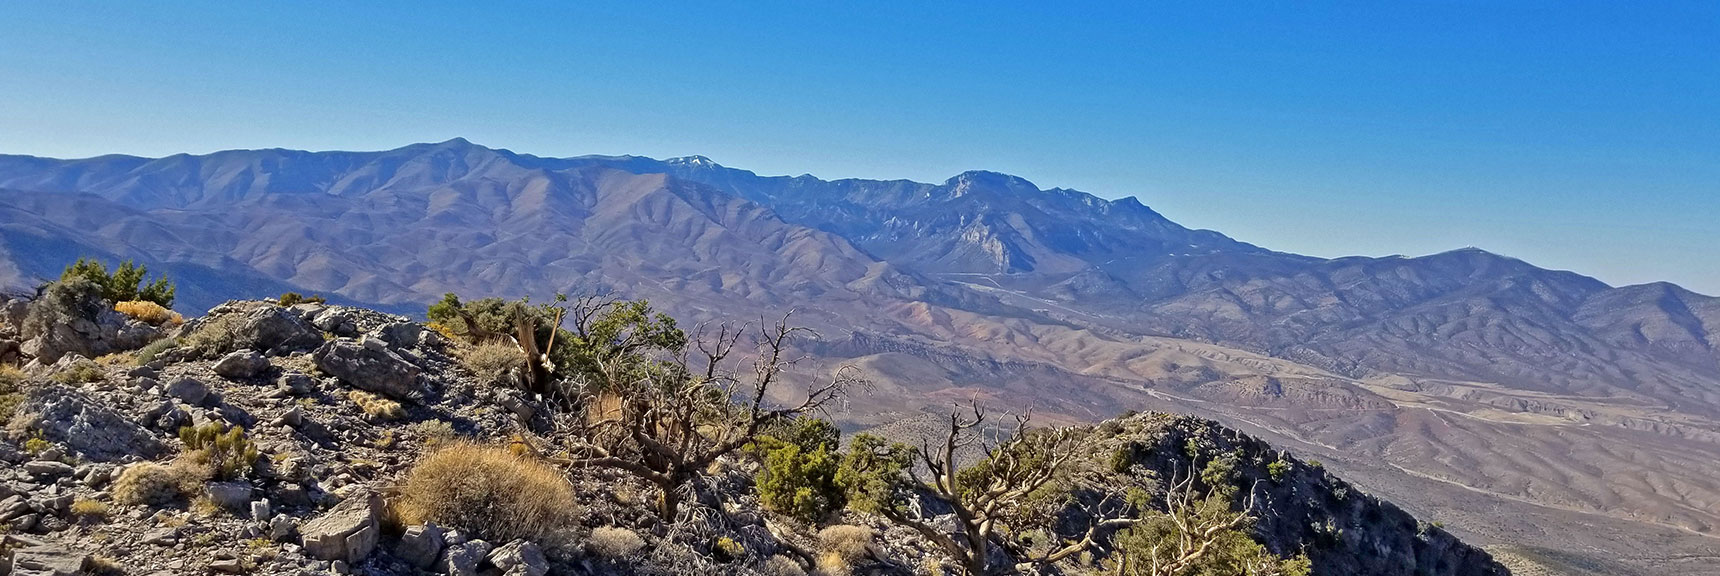 View Back to Mt. Charleston Wilderness from La Madre Mountain Summit | La Madre Mountain,, El Padre Mountain, Burnt Peak | La Madre Mountains Wilderness, Nevada